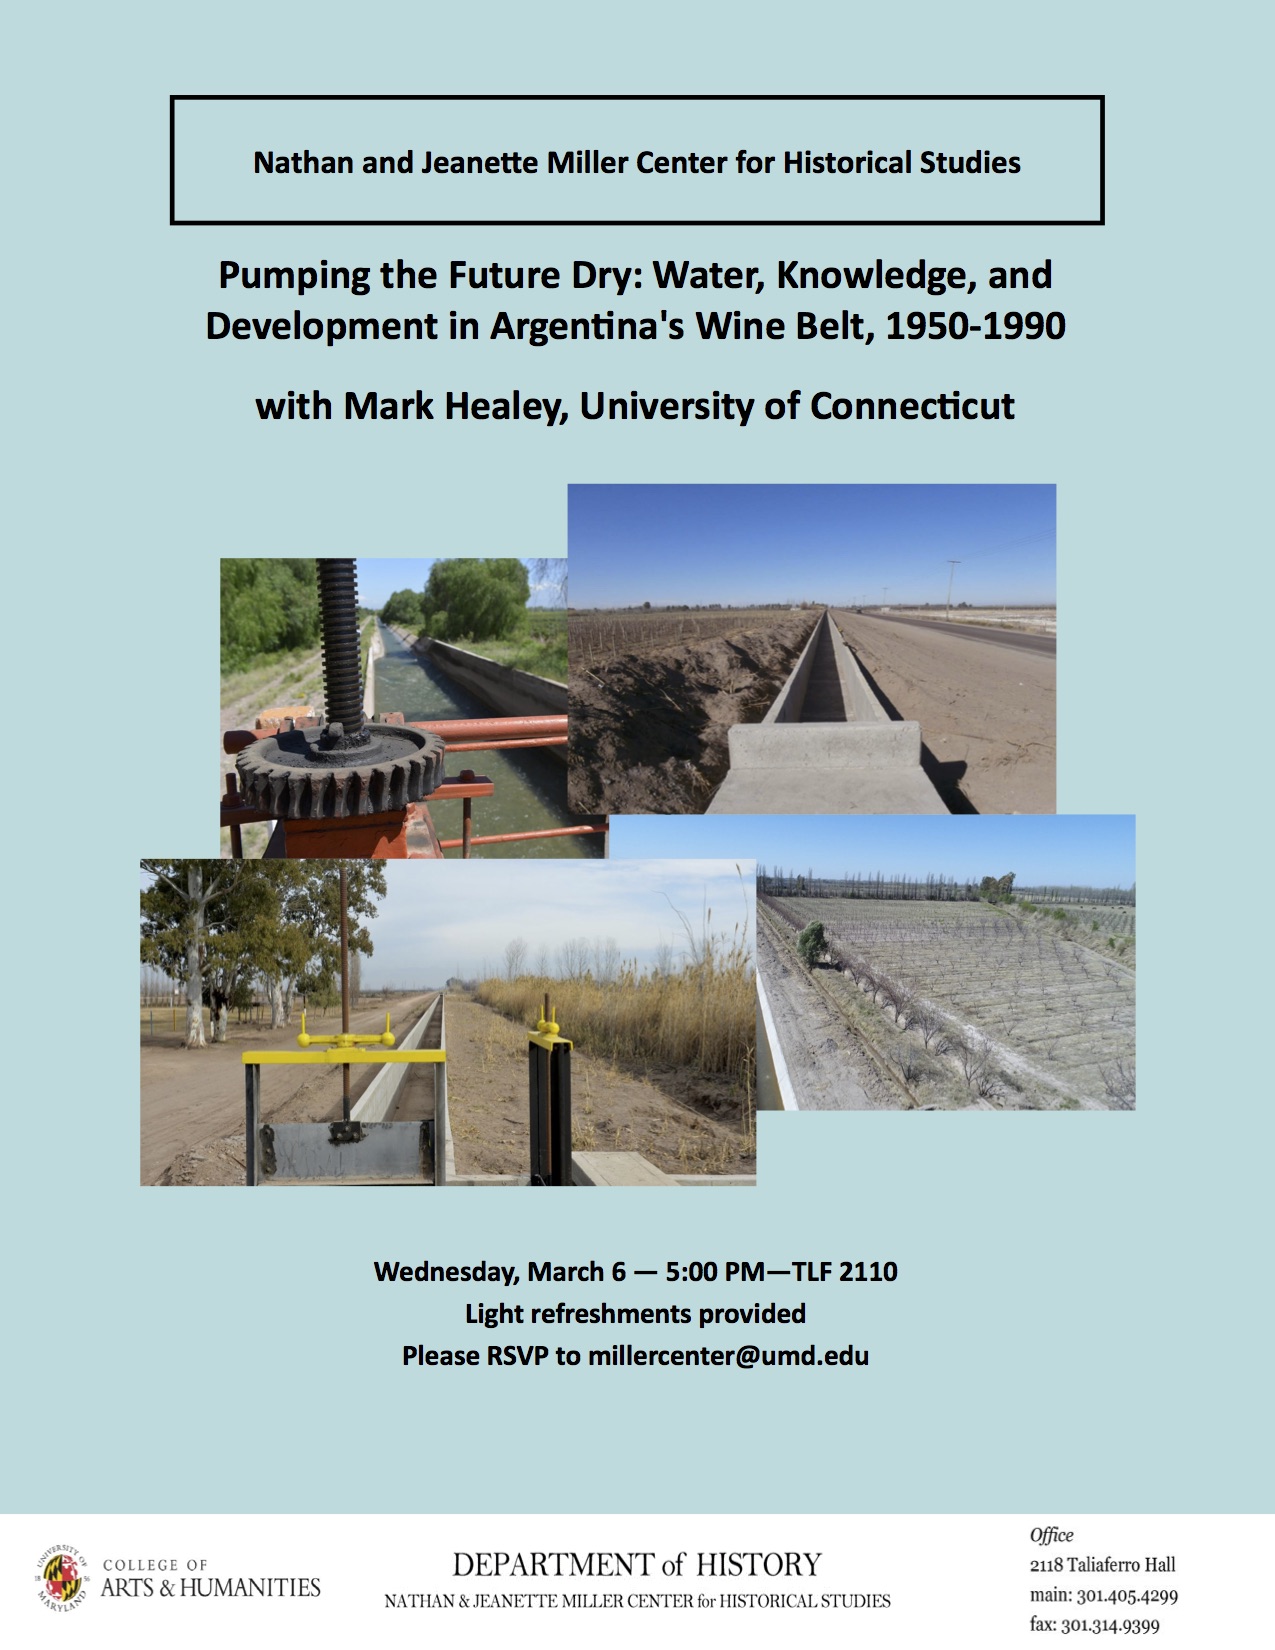 Image for event - Pumping the Future Dry: Water, Knowledge, and Development in Argentina's Wine Belt, 1950-1990